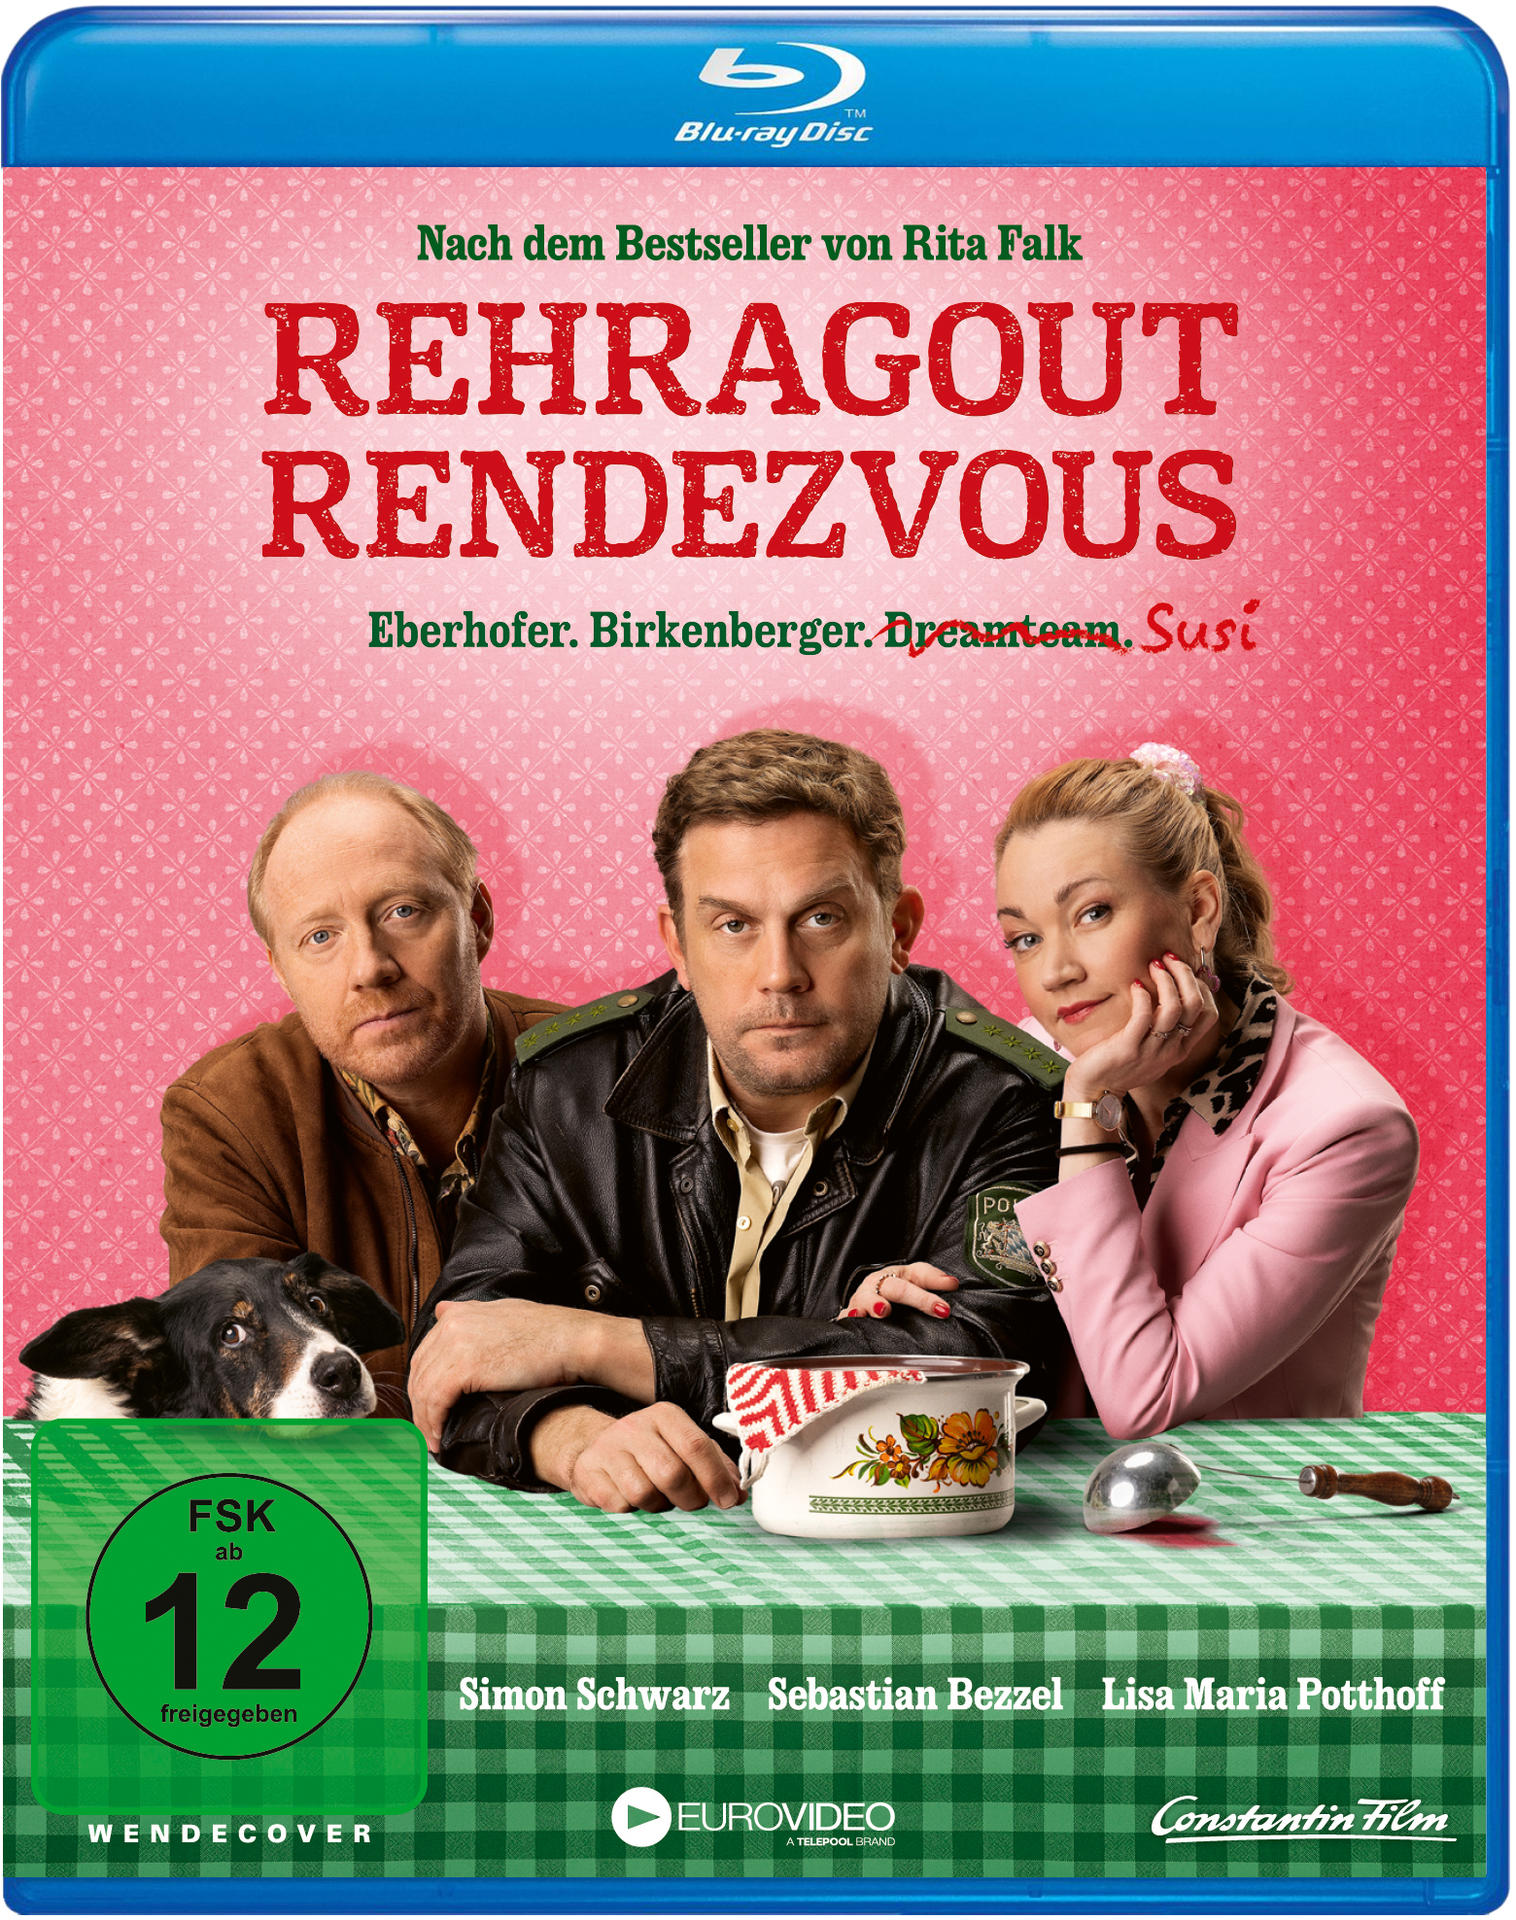 Rehragout-Rendezvous Blu-ray